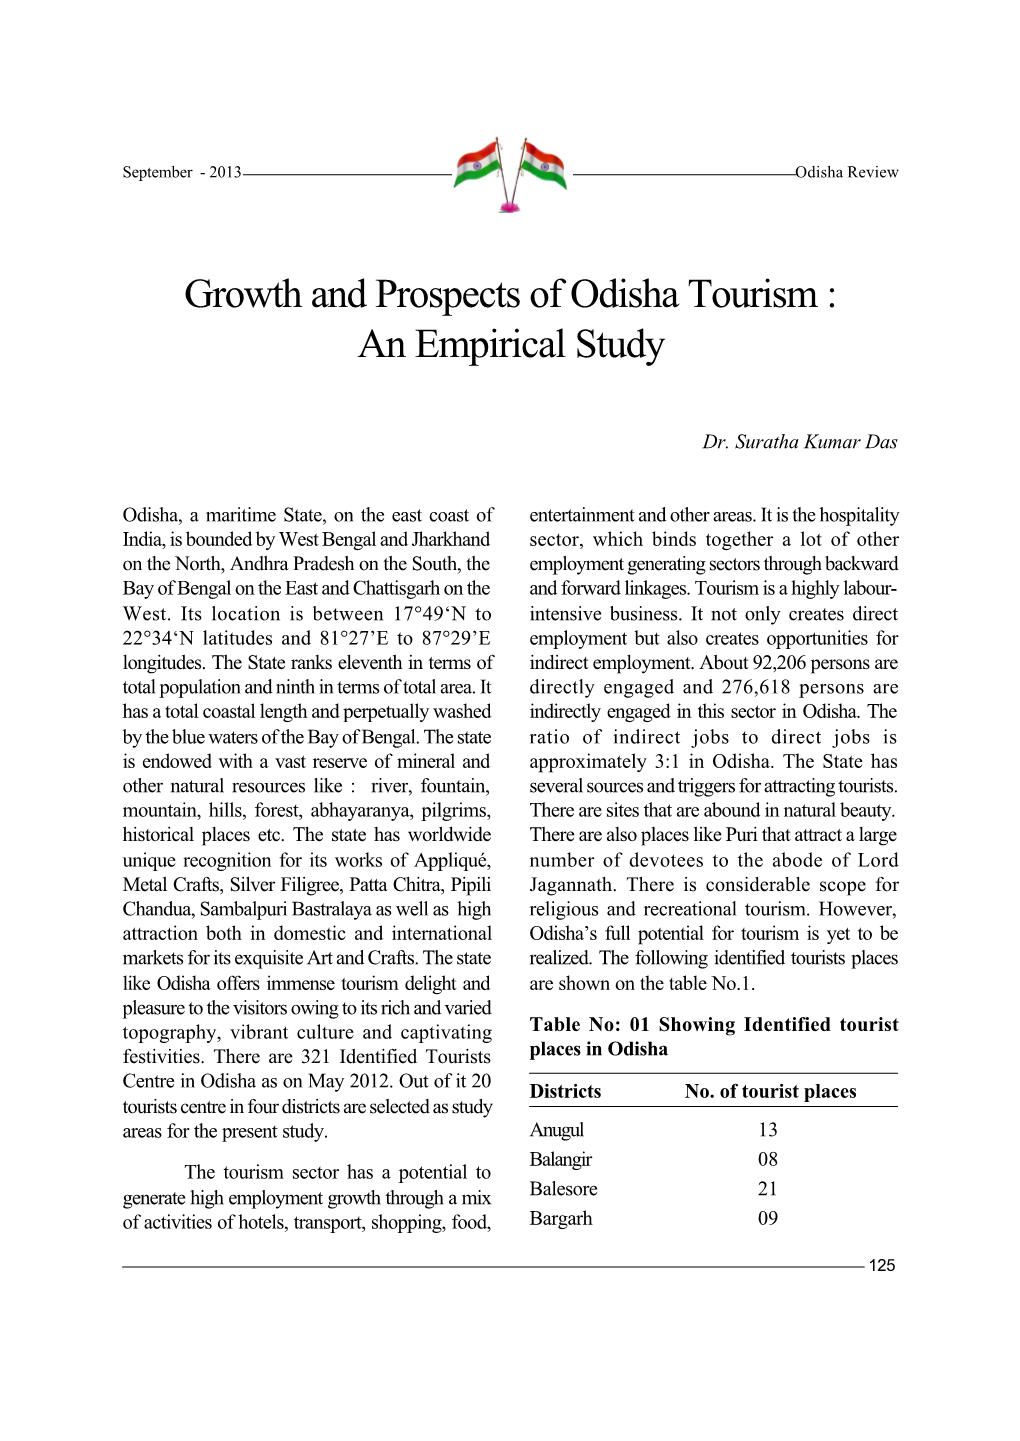 Growth and Prospects of Odisha Tourism : an Empirical Study